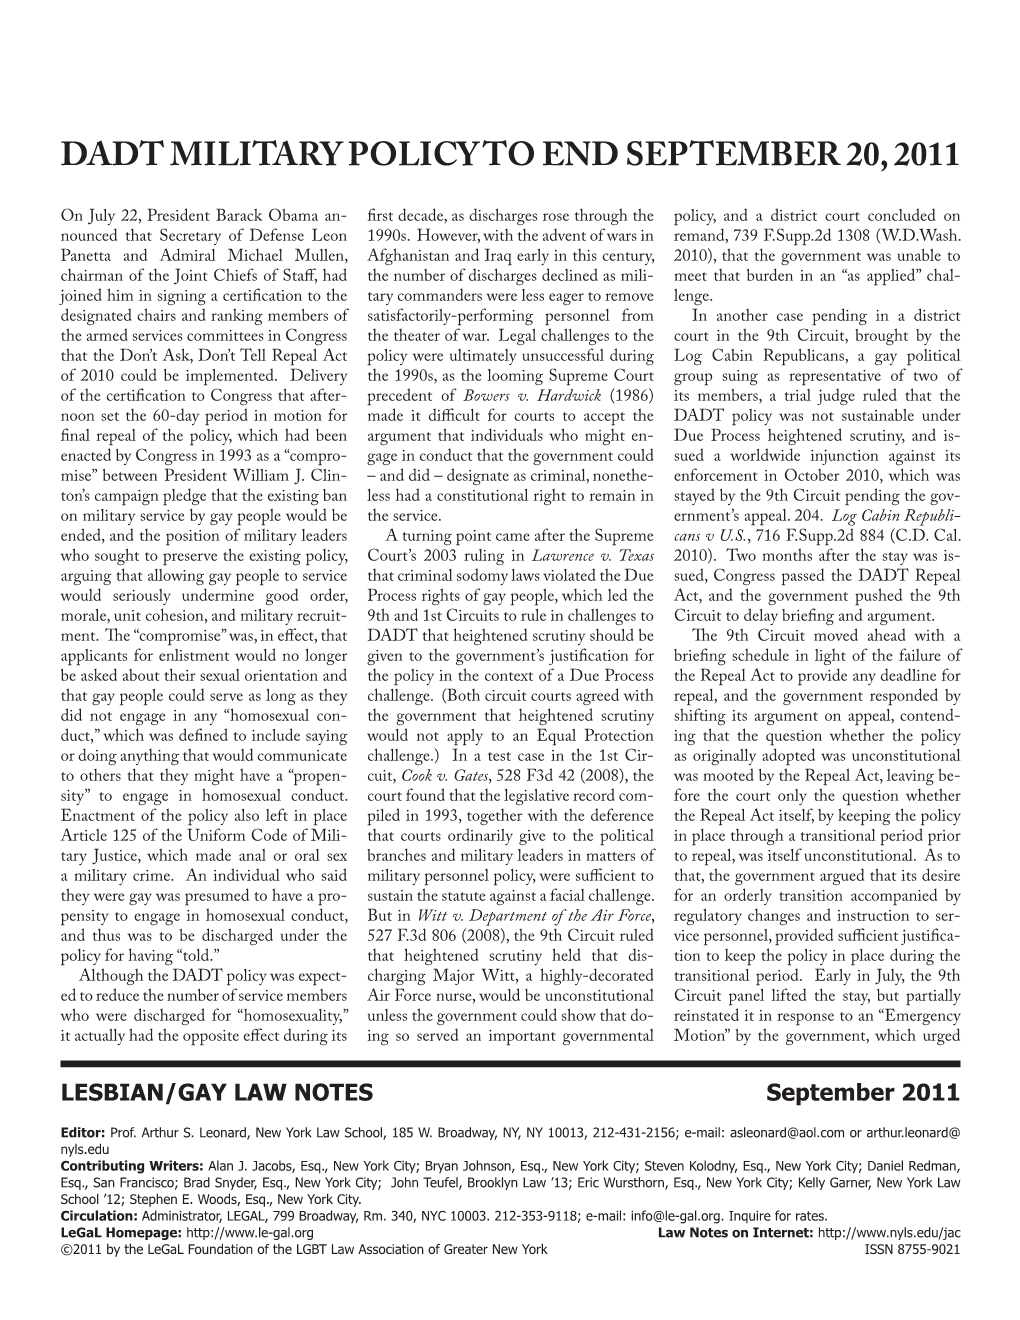 Dadt Military Policy to End September 20, 2011